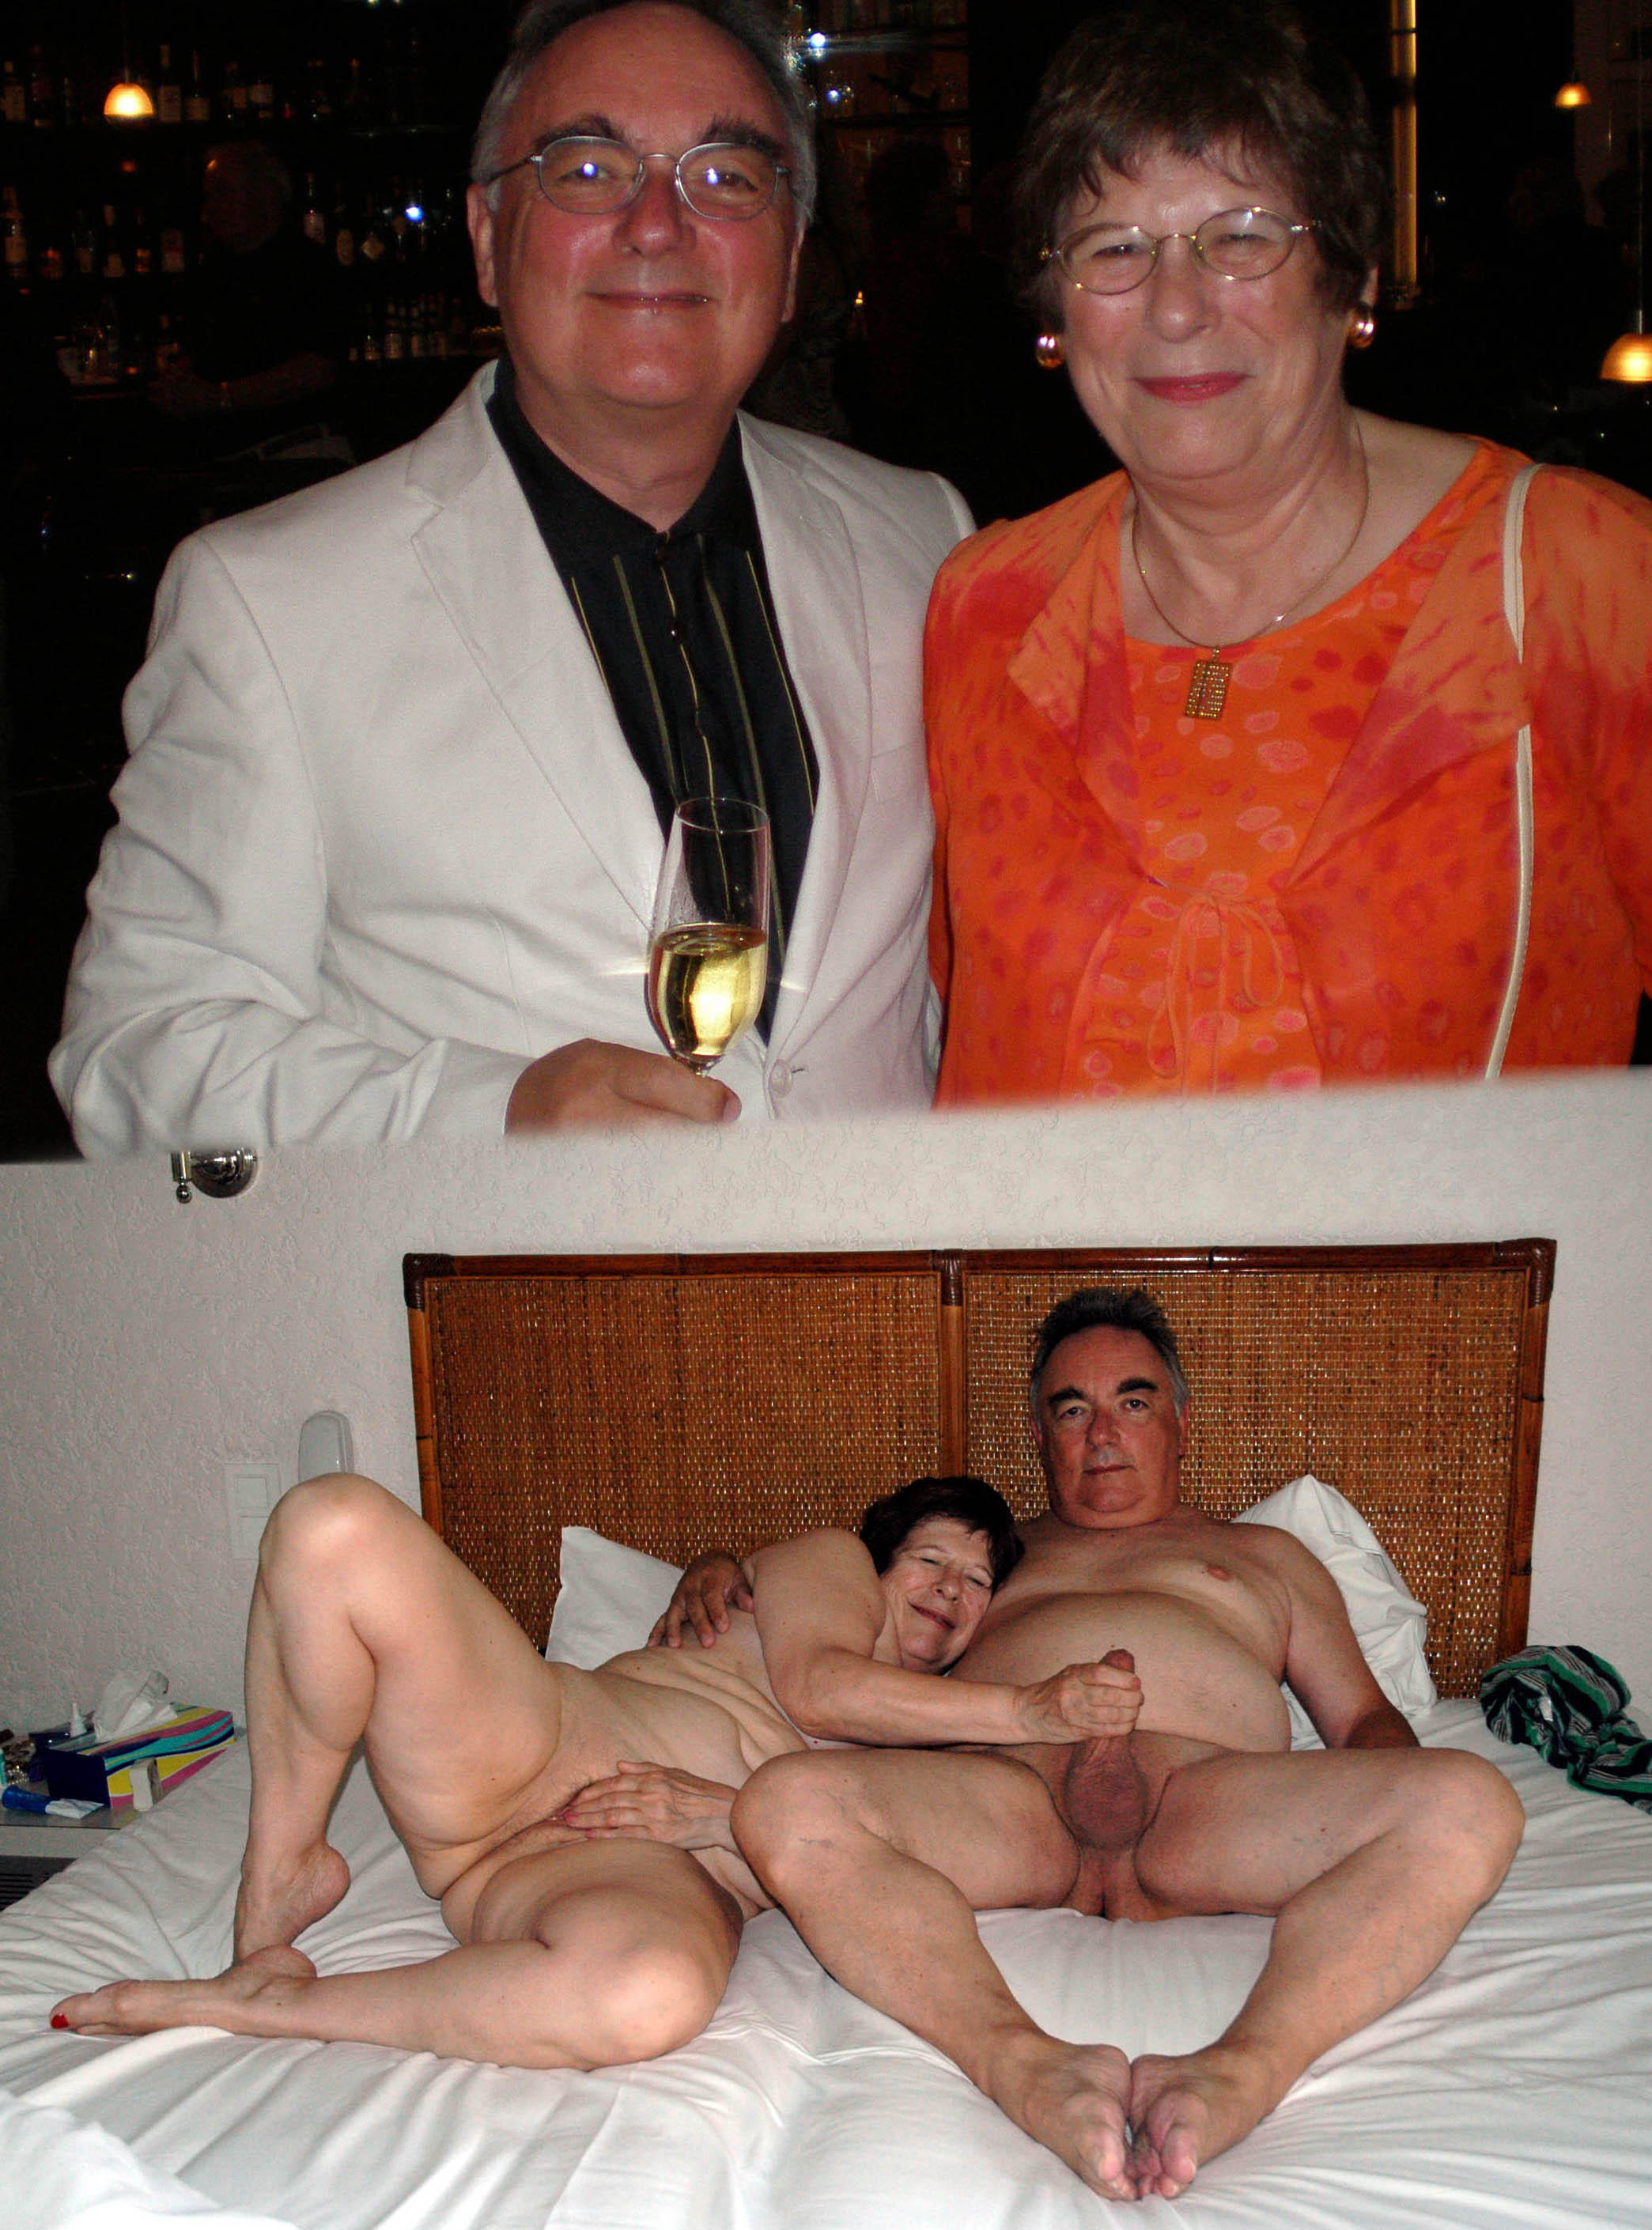 Real Homemade Clothed Unclothed Couples - Over 40 Dressed Undressed Couple | Niche Top Mature